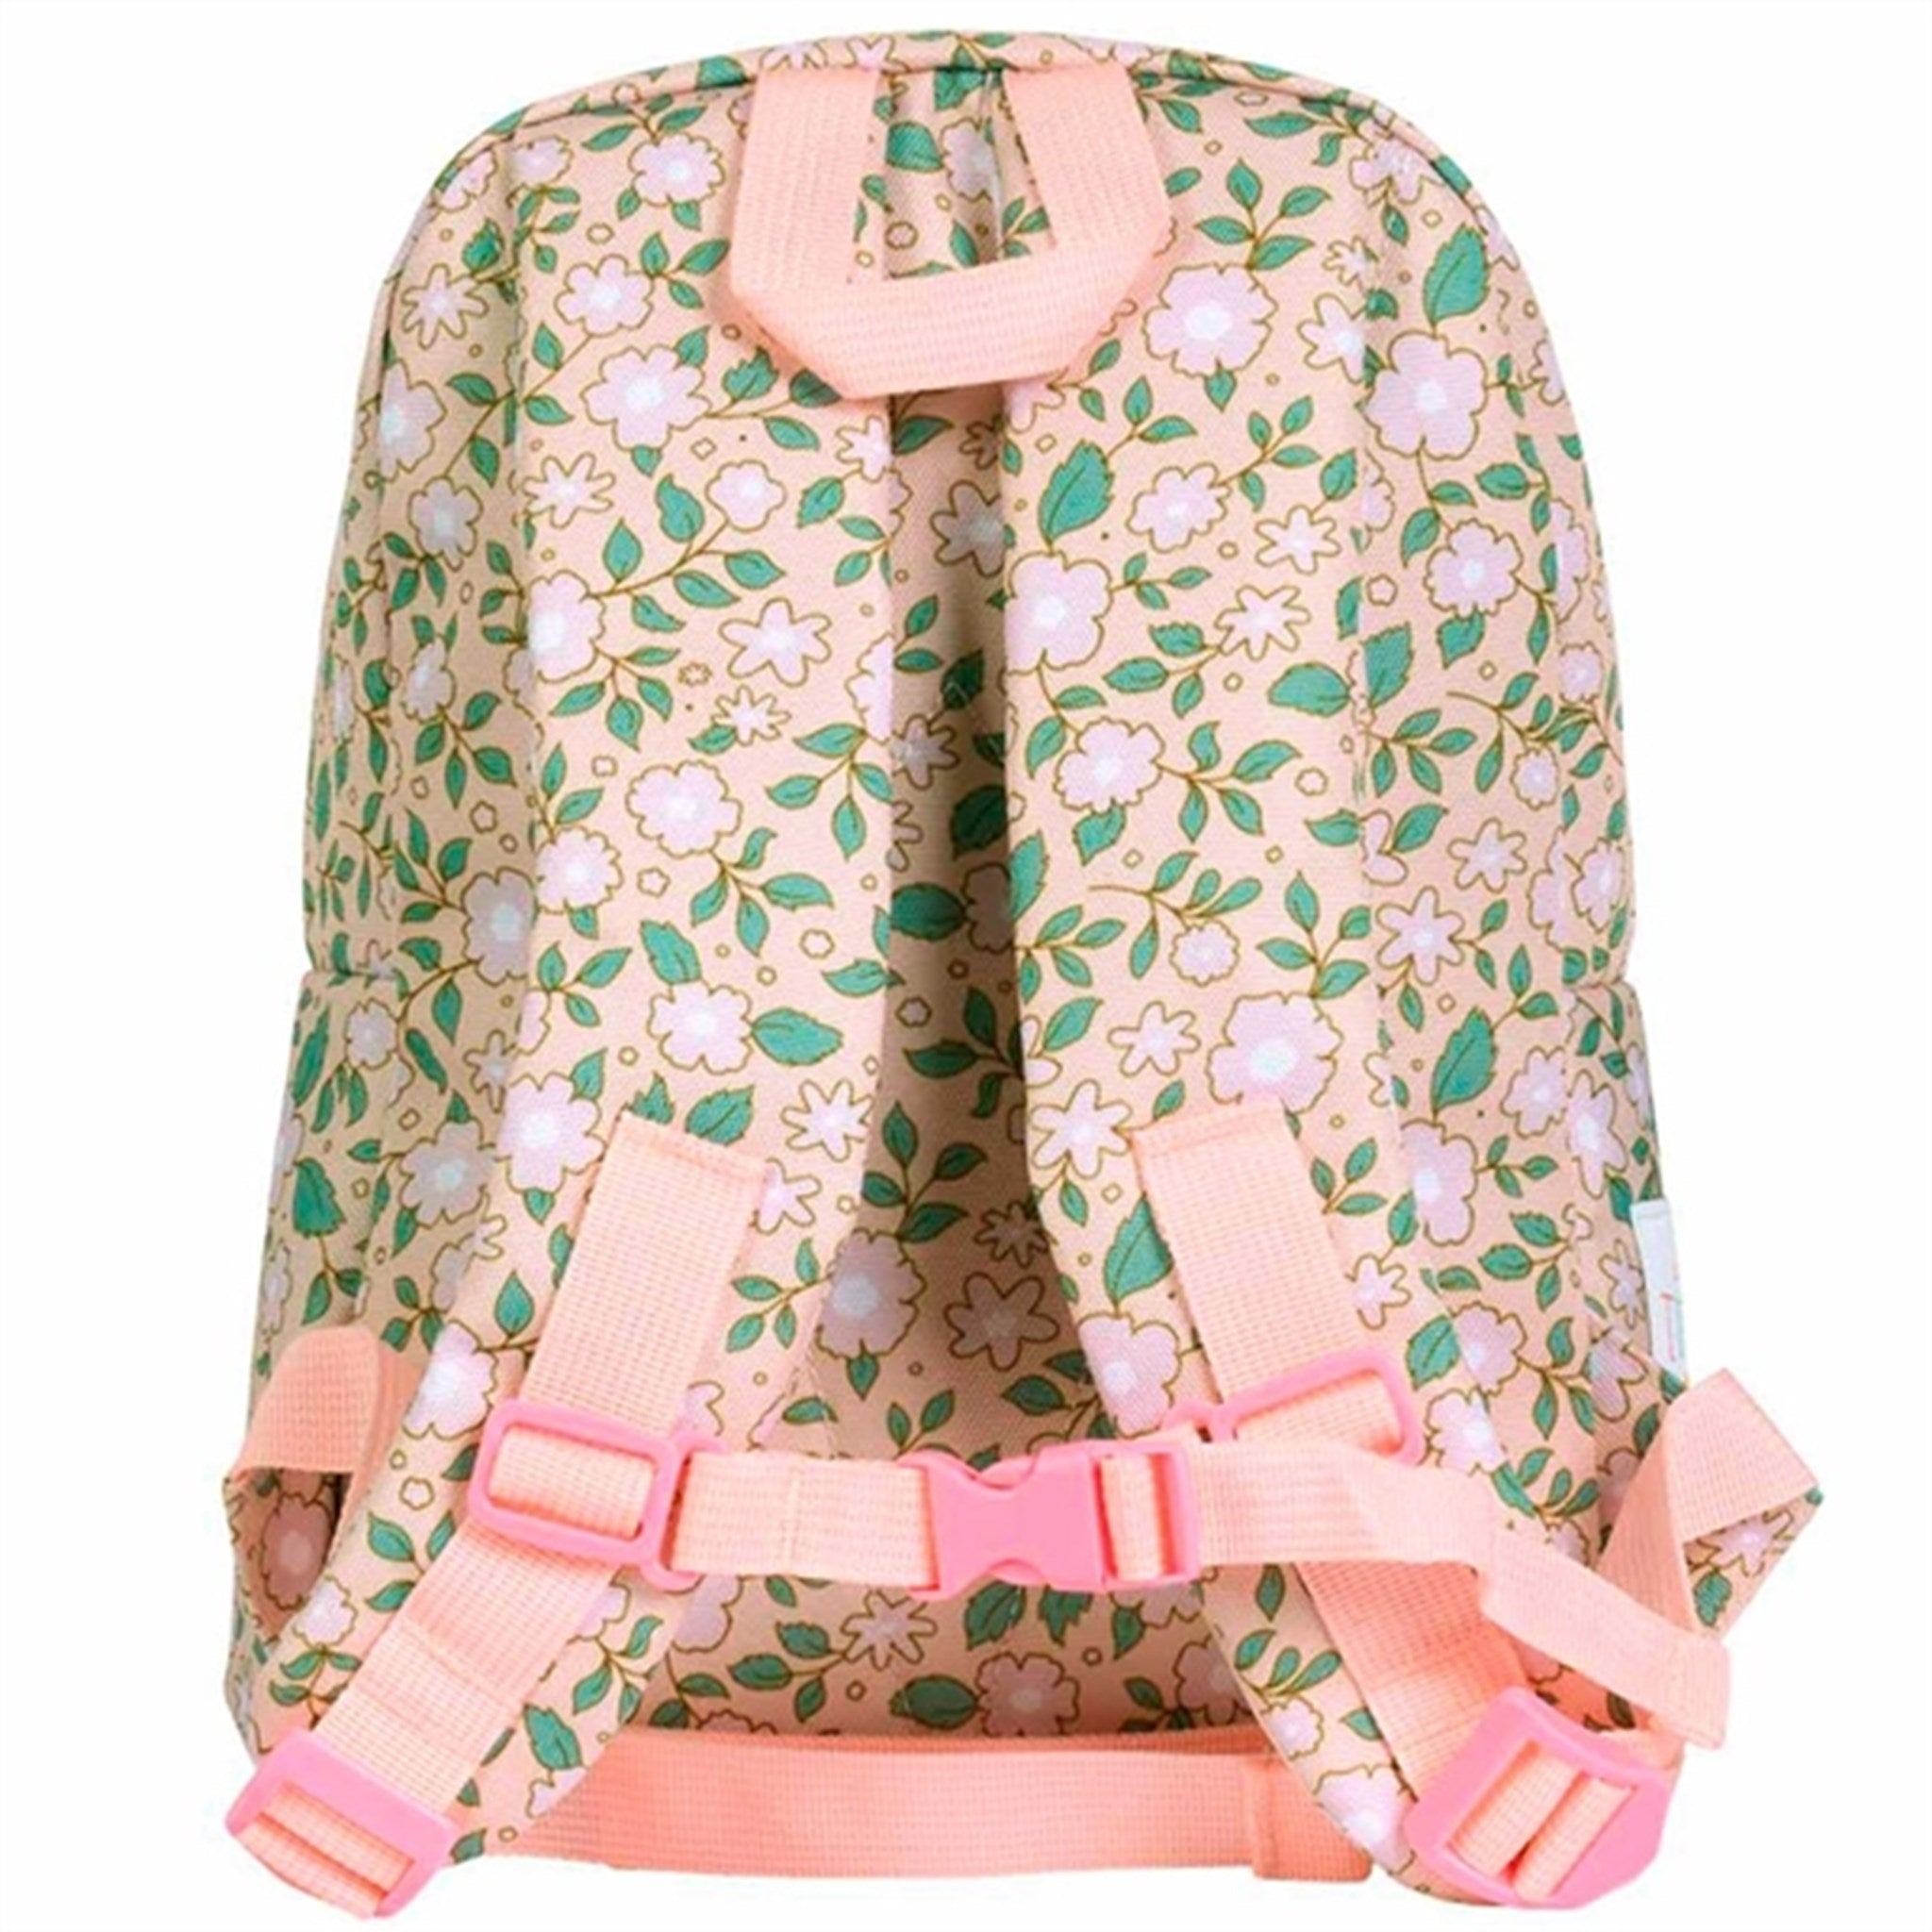 A Little Lovely Company Backpack Small Blossom Pink 3